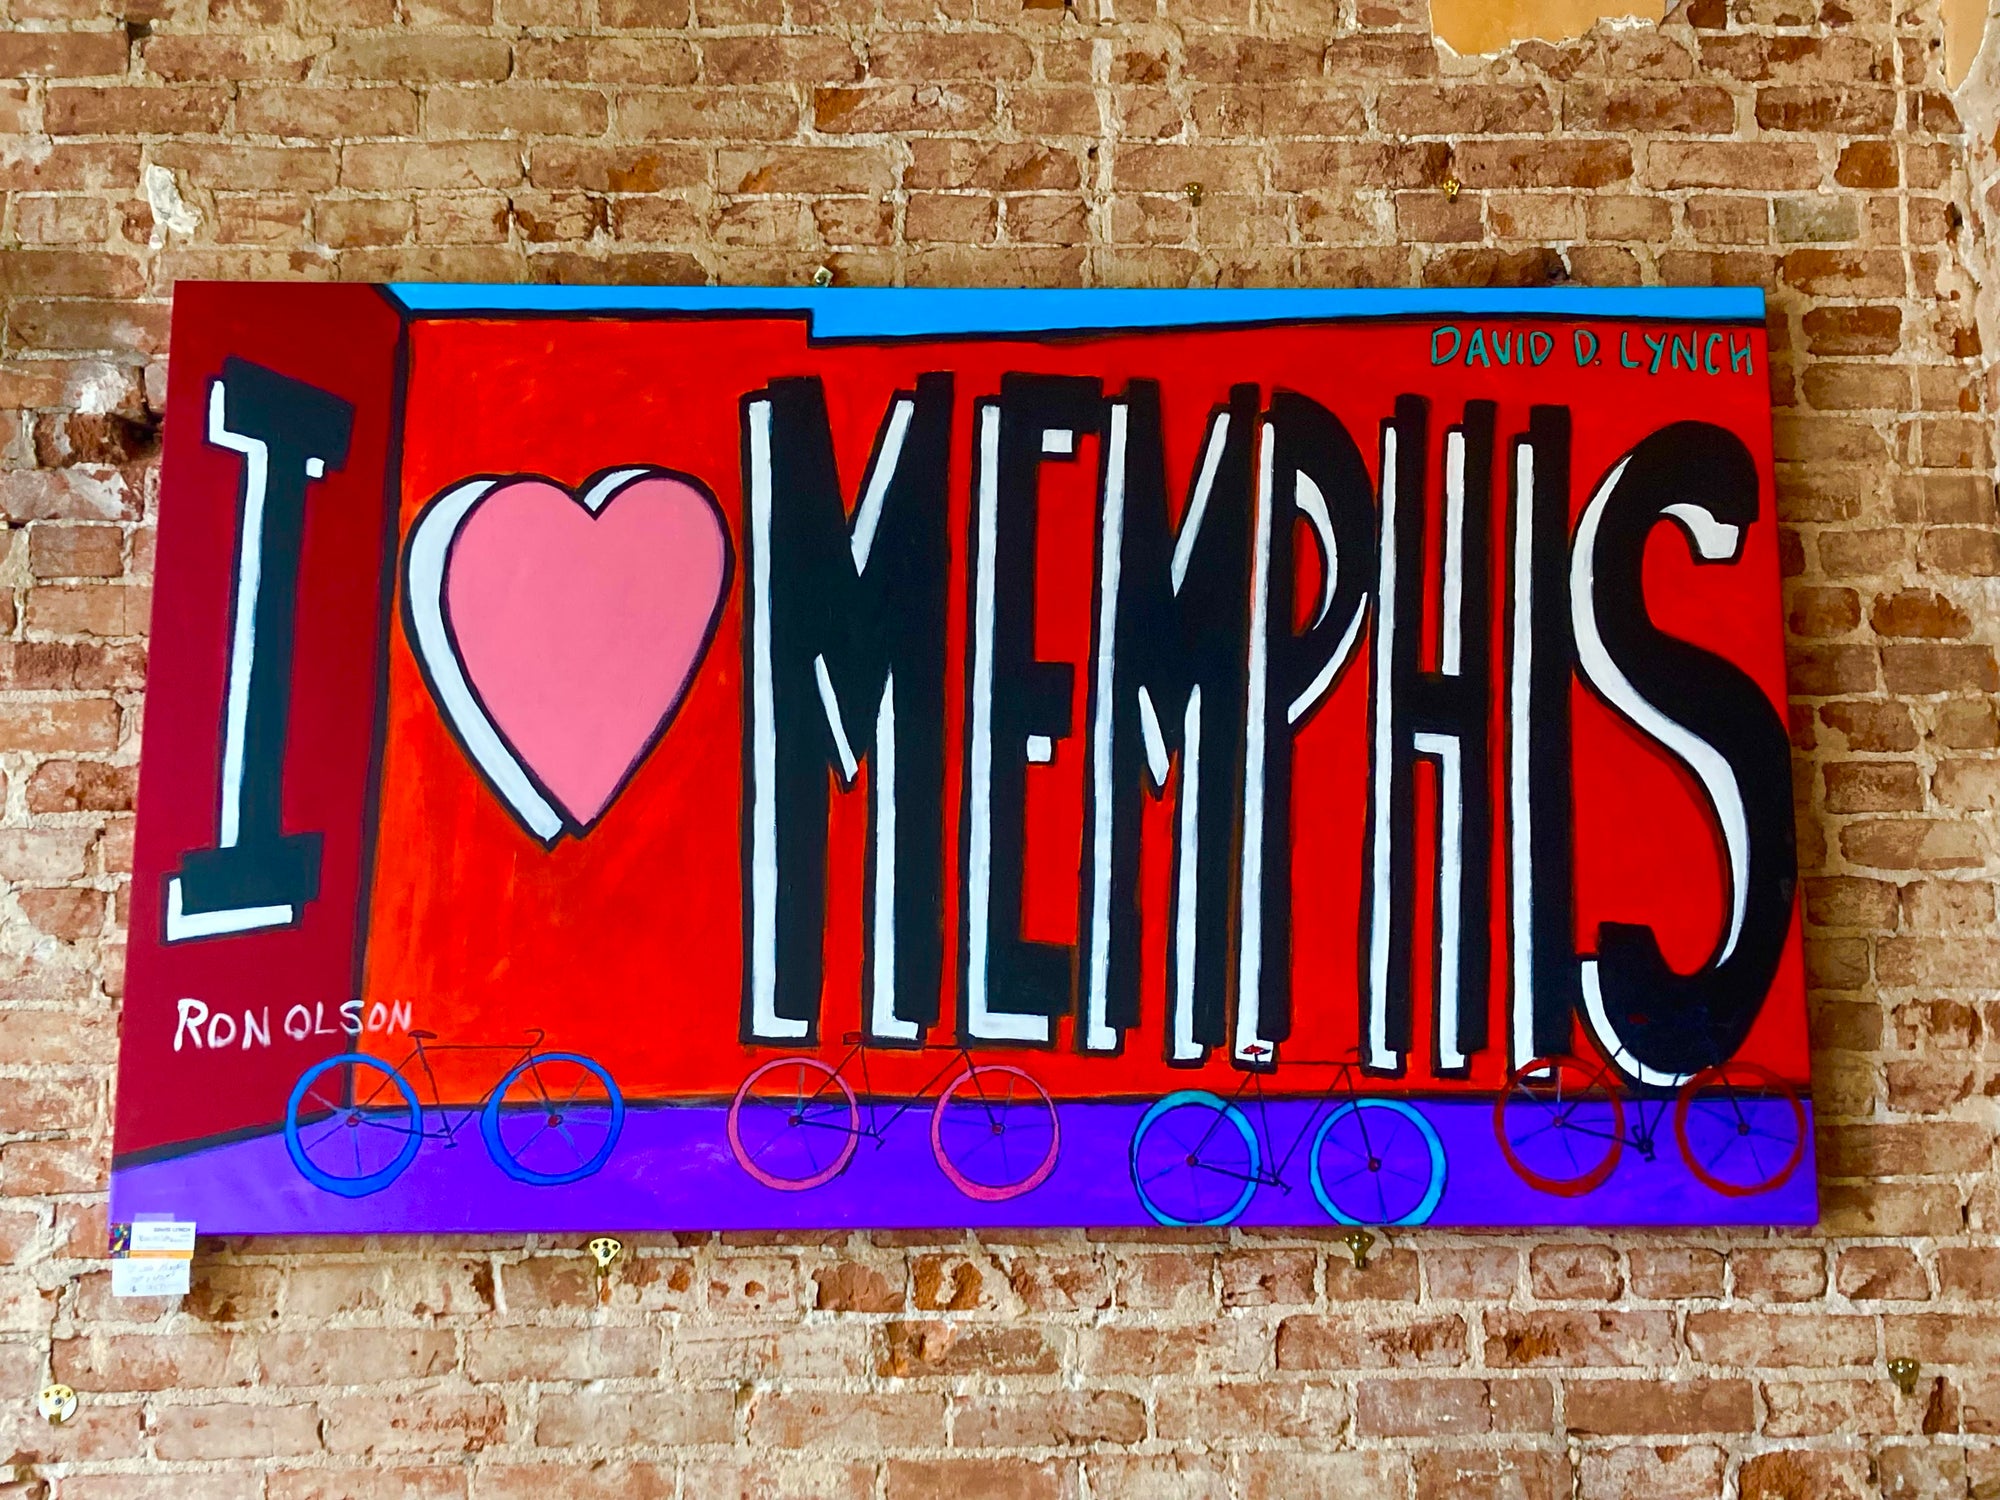 "I Love Memphis"  74" x 42" with Ron Olson and David Lynch